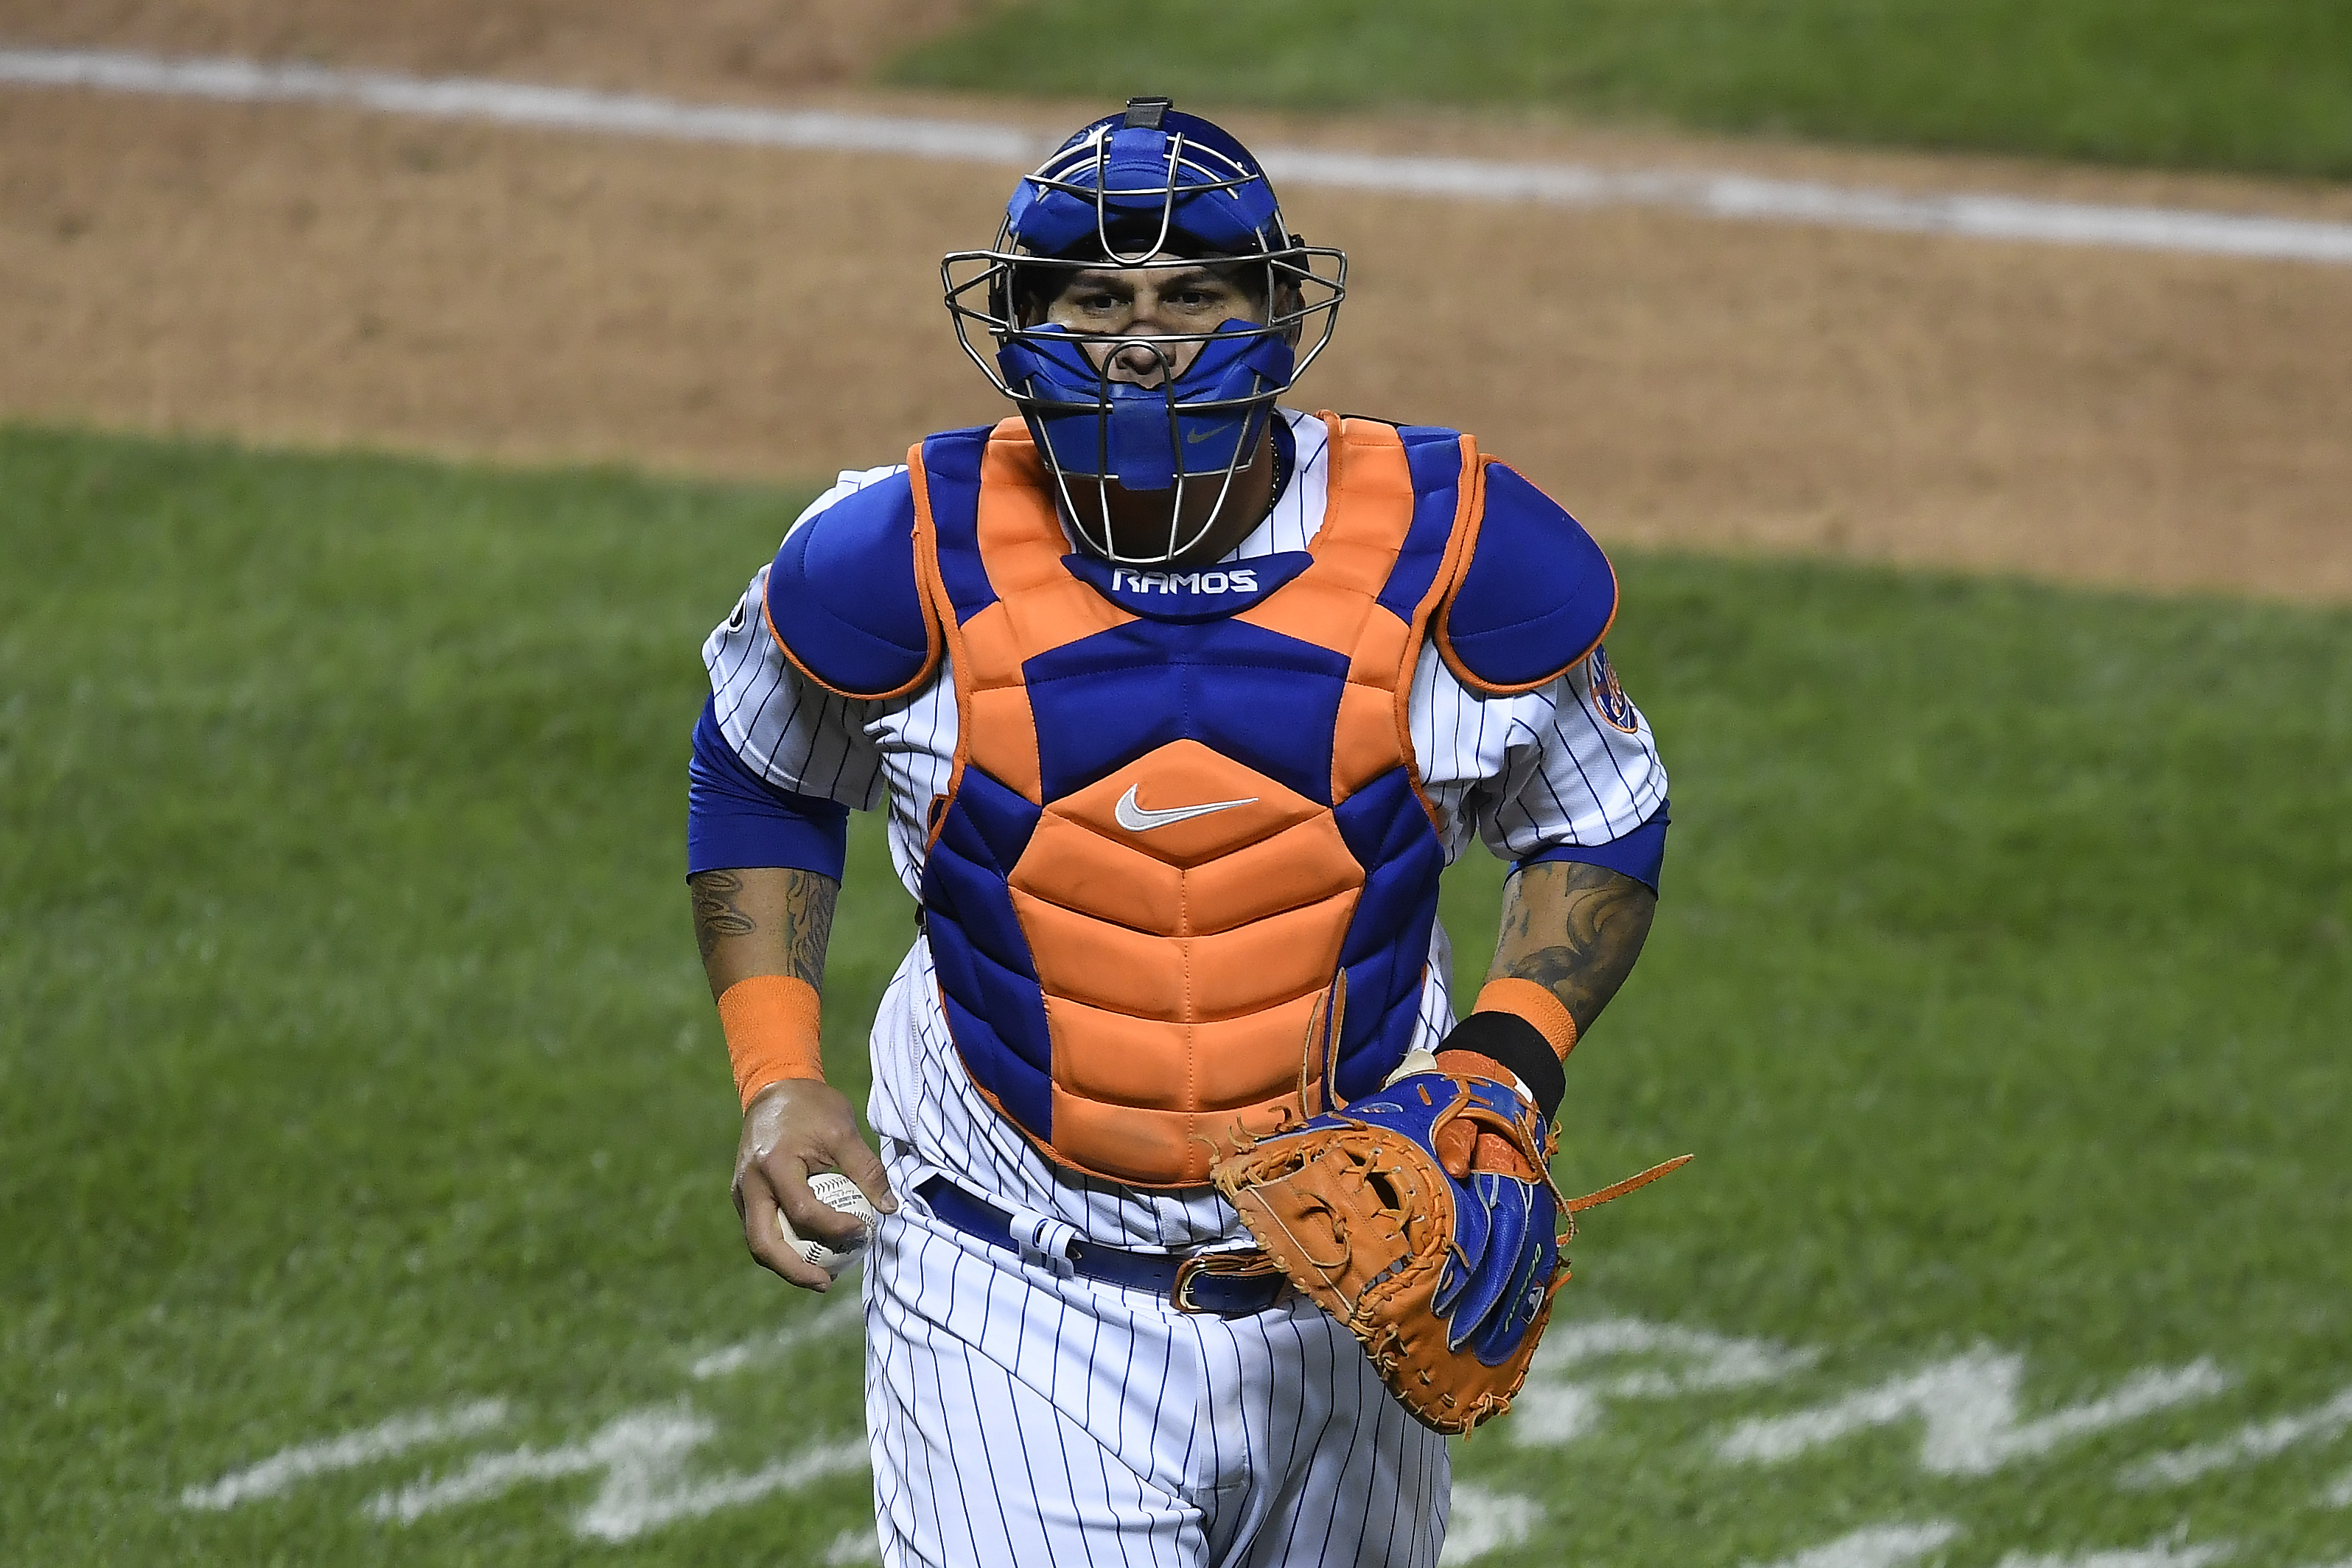 Detroit Tigers reportedly agree to 1-year deal with catcher Wilson